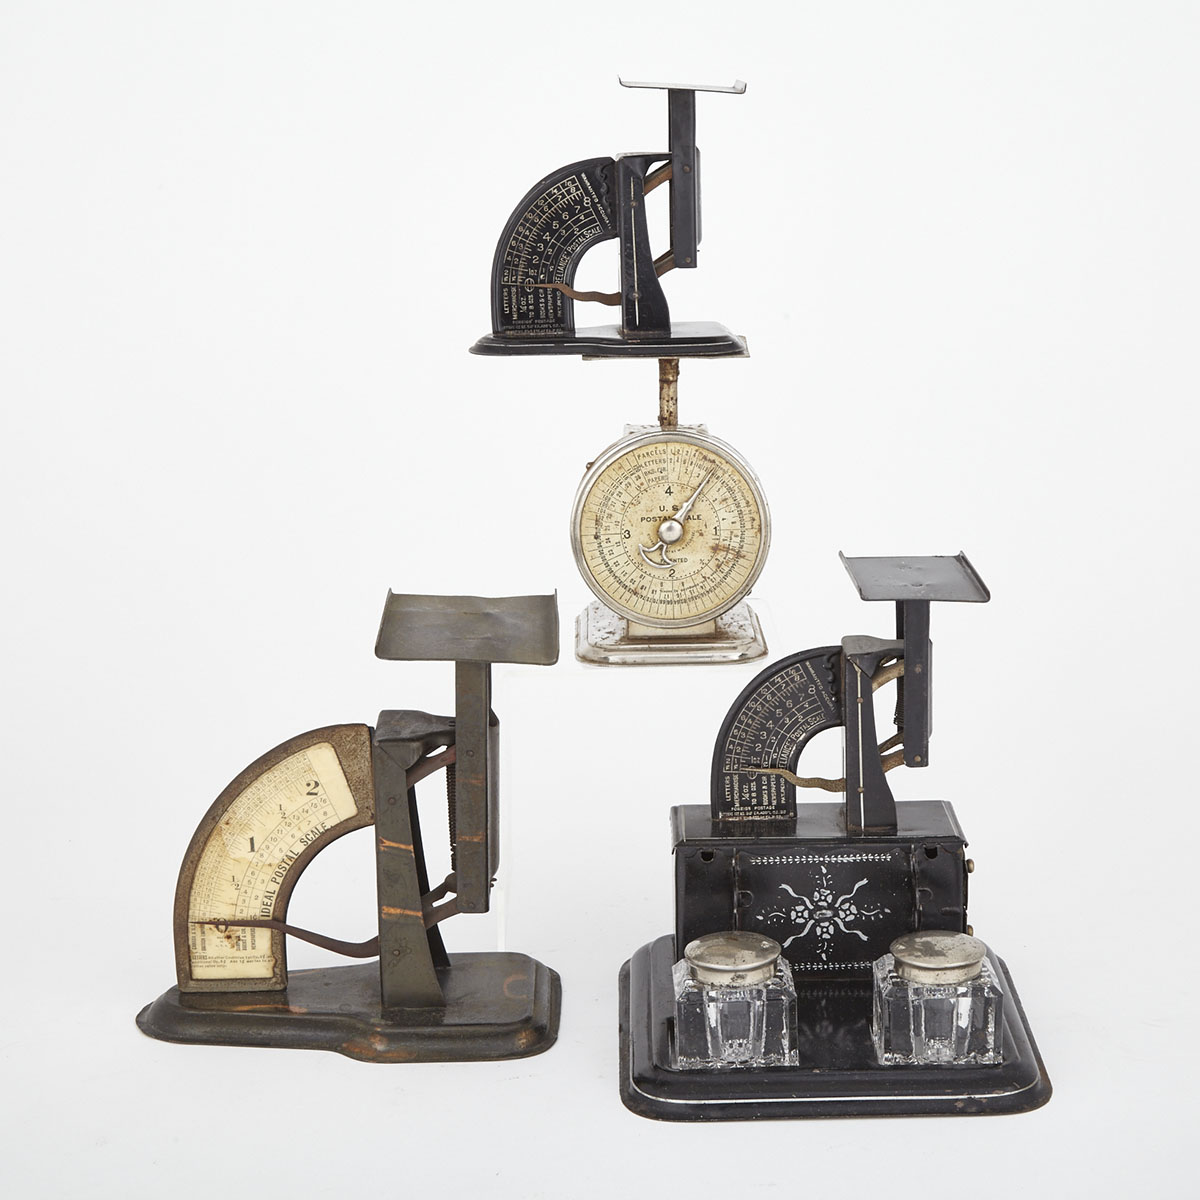 Four Metal Postal Scales, 19th and Early 20th century